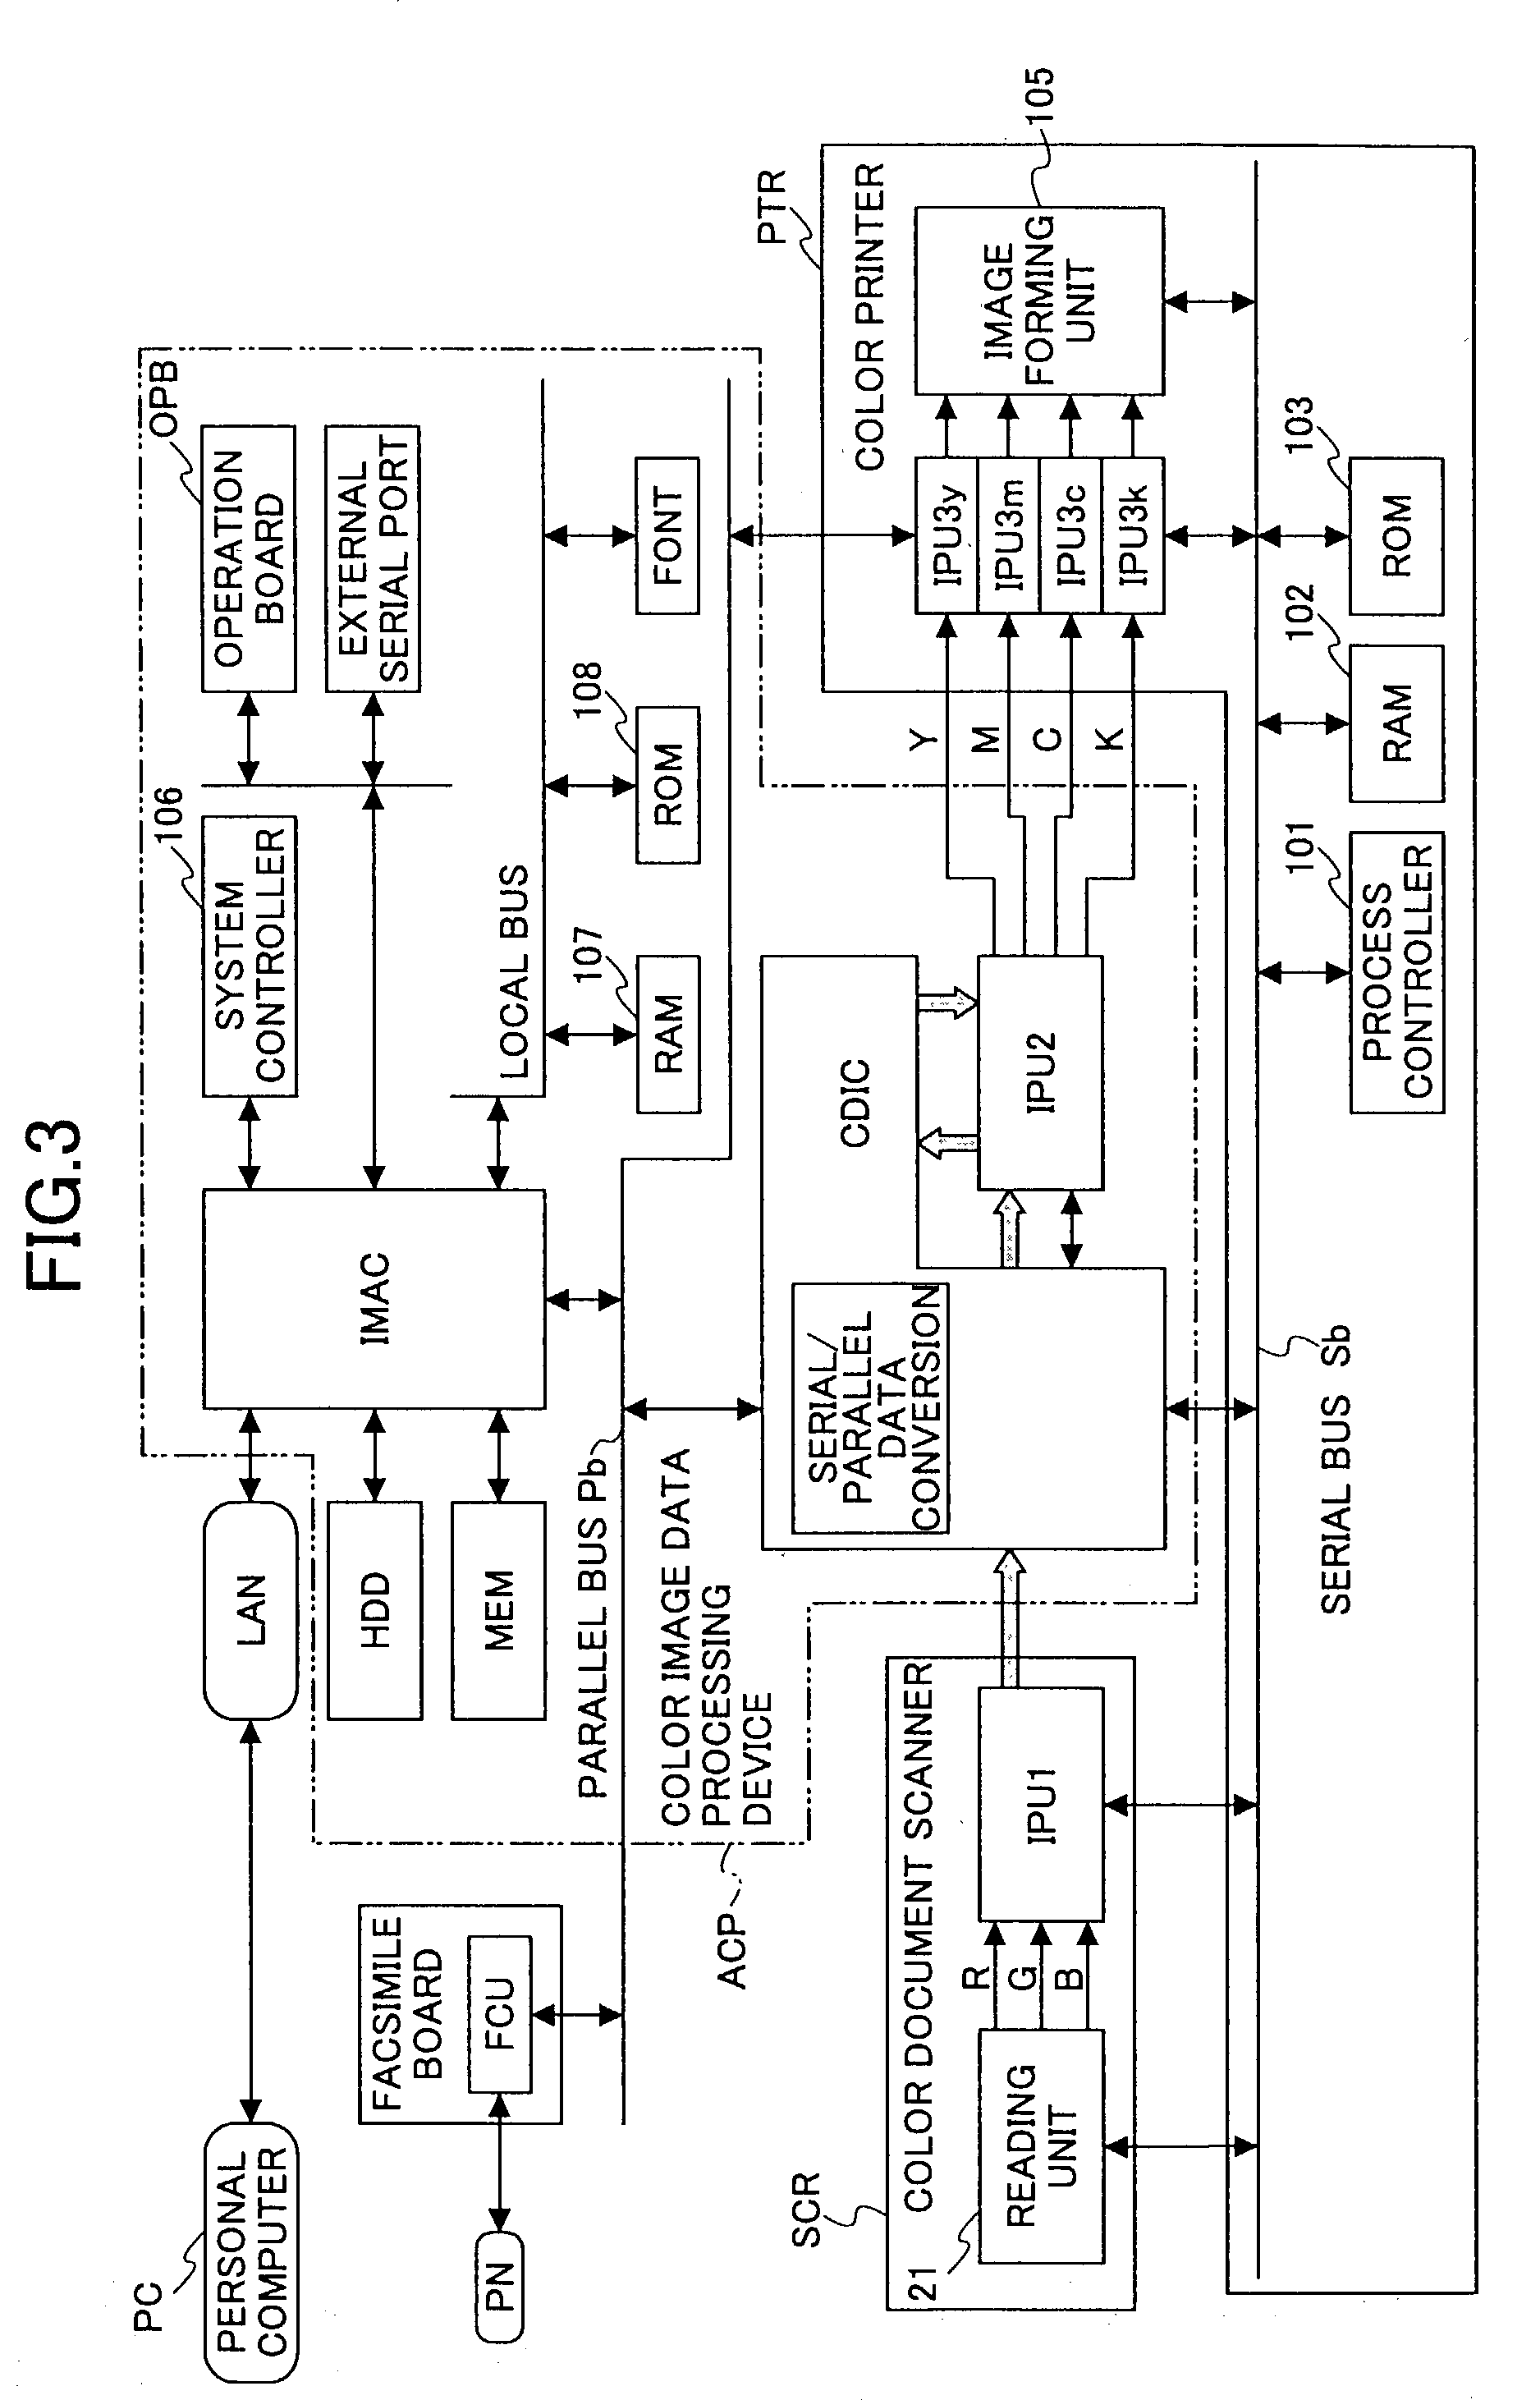 Image data processing device processing a plurality of series of data items simultaneously in parallel